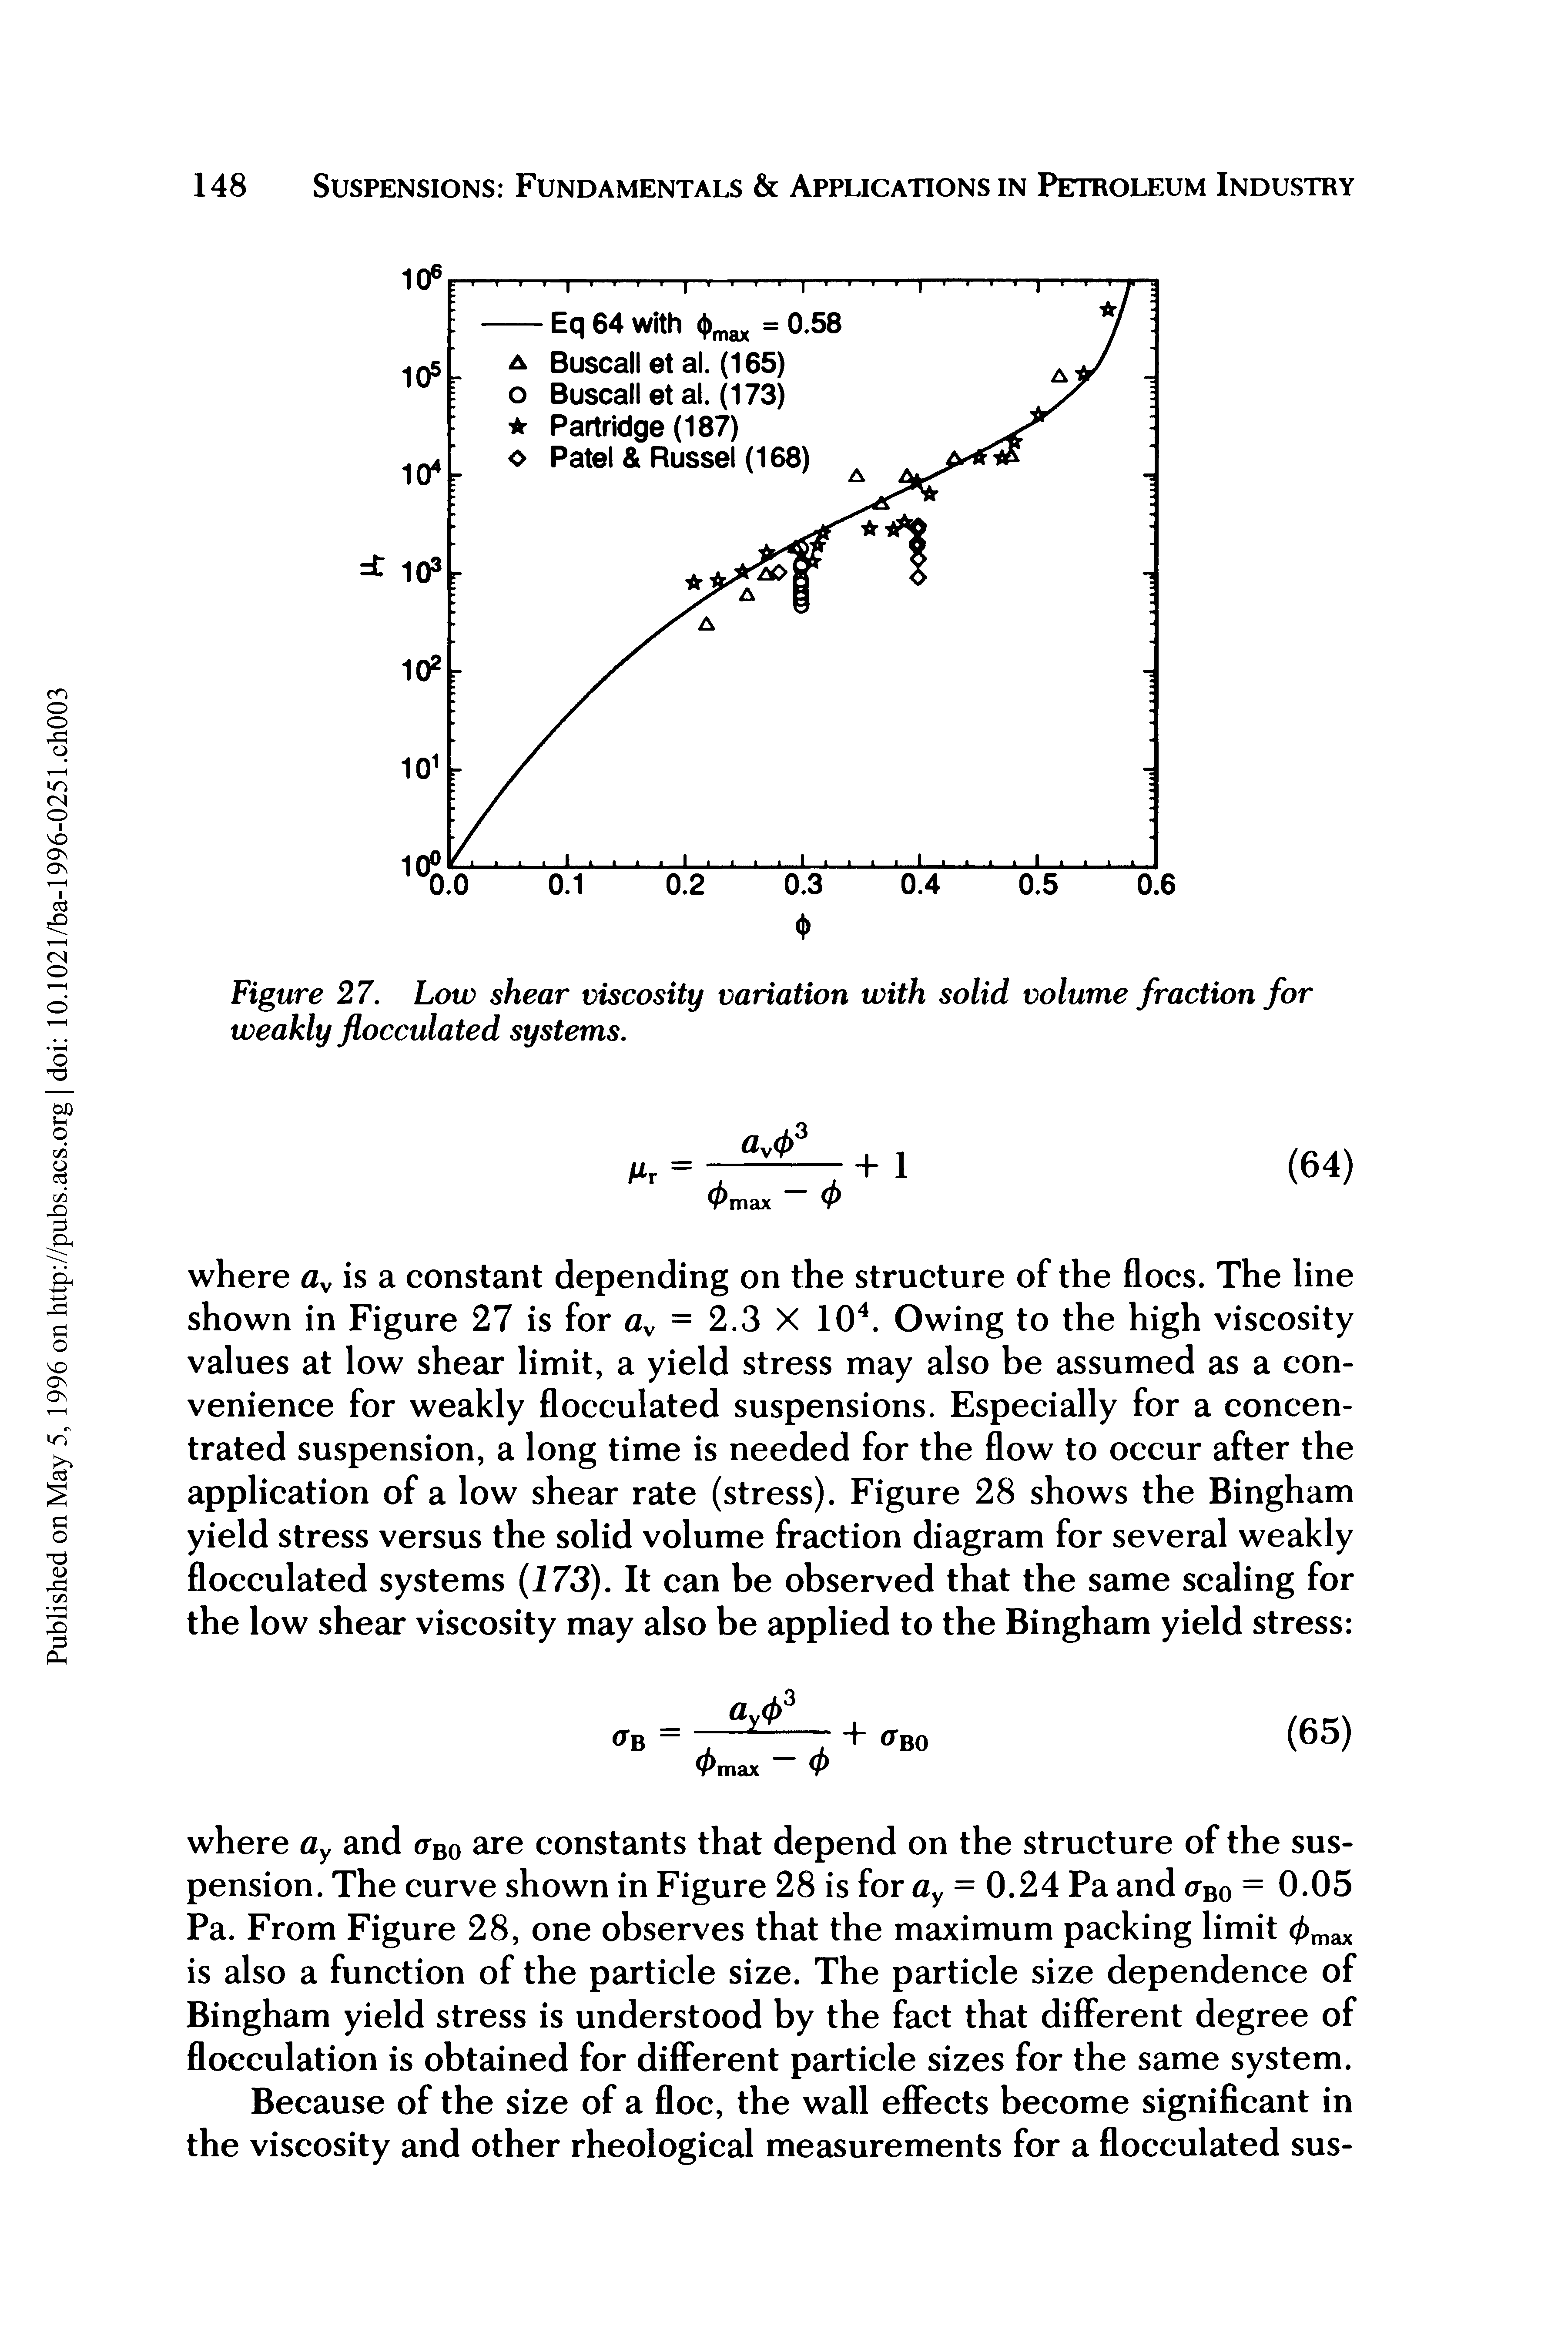 Figure 27. Low shear viscosity variation with solid volume fraction for weakly flocculated systems.